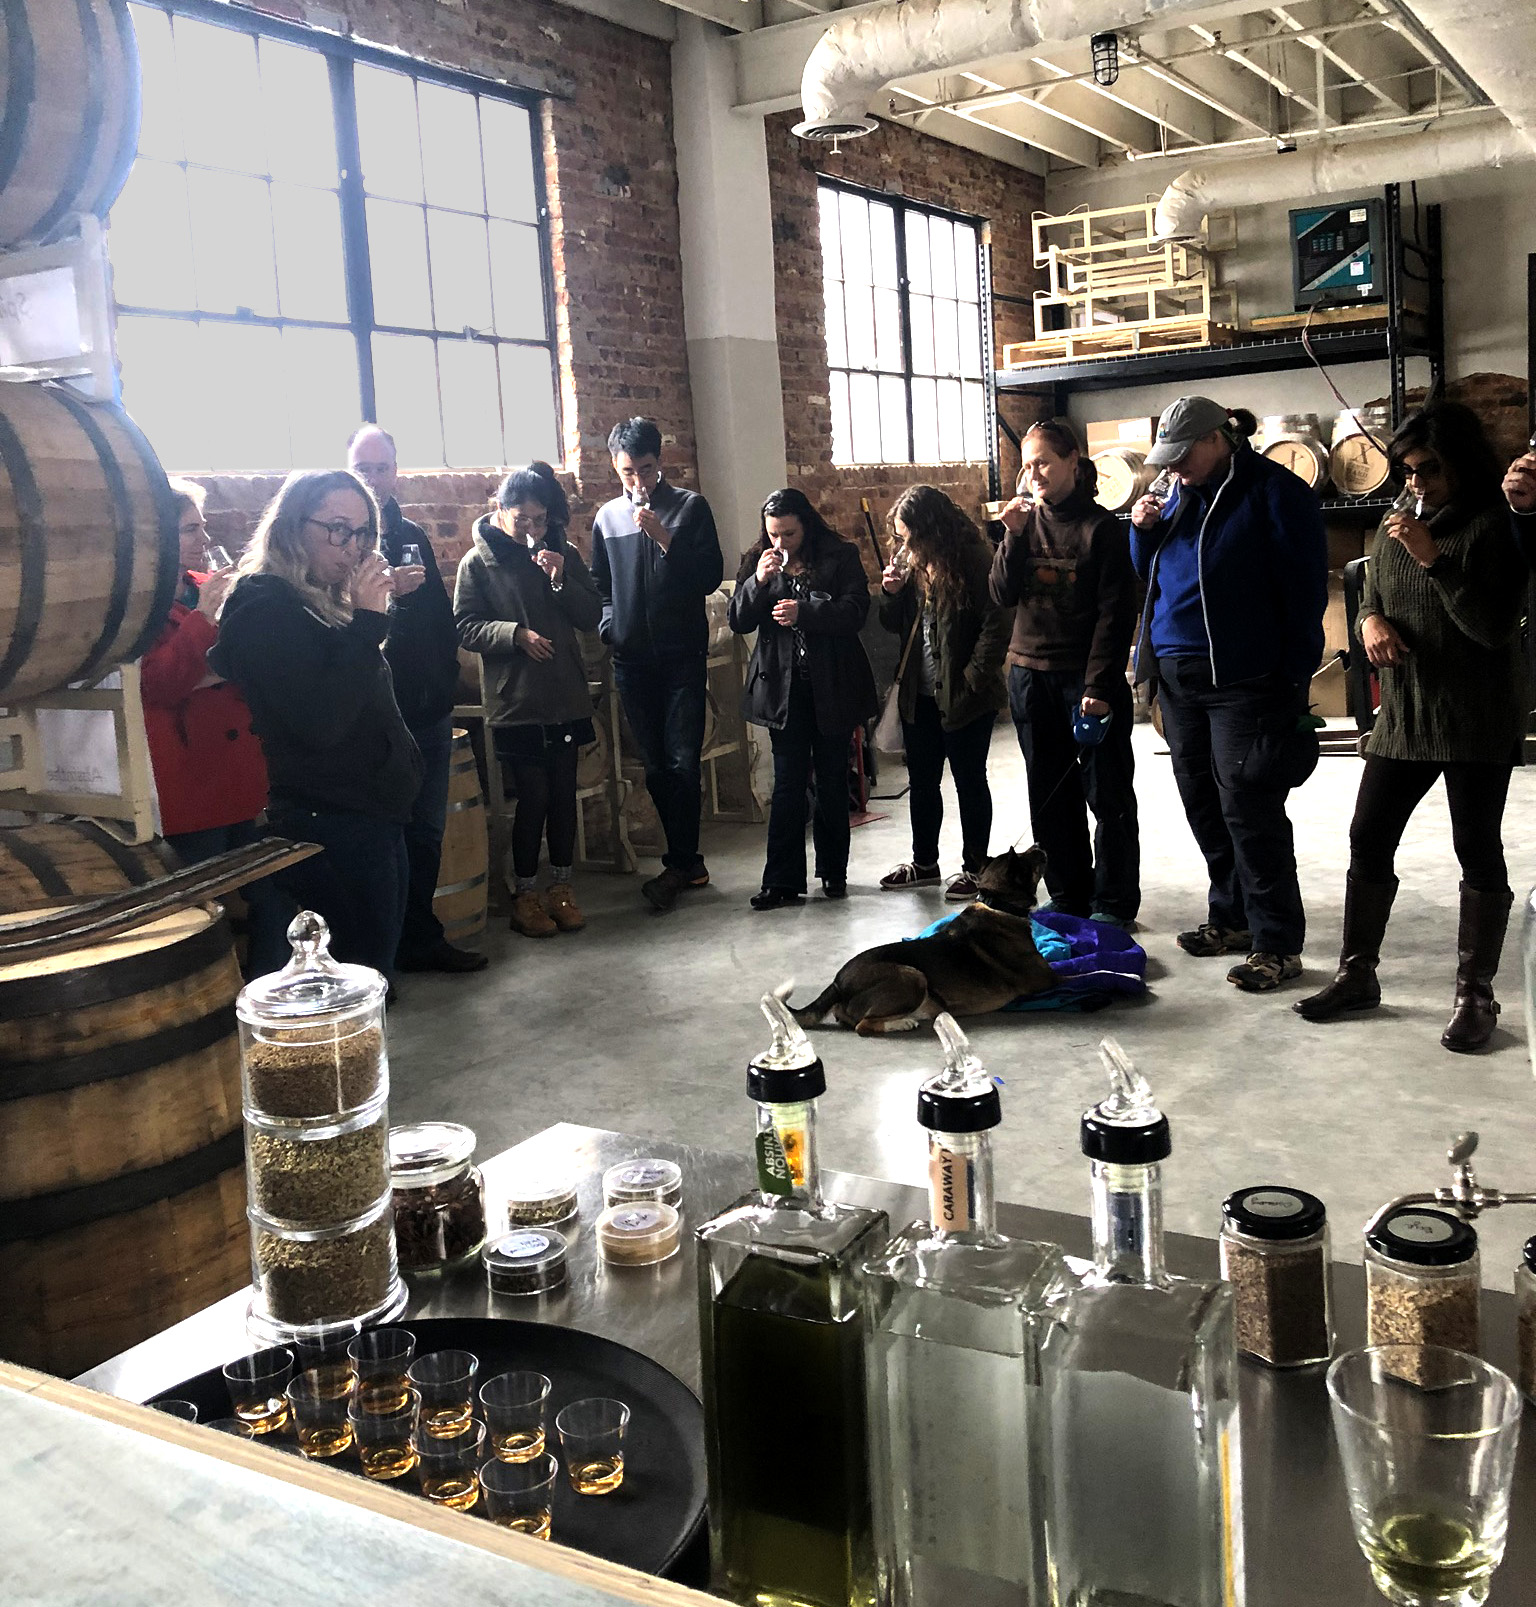 Tour group learning how to nose and taste spirits at Tenth Ward Distilling Company